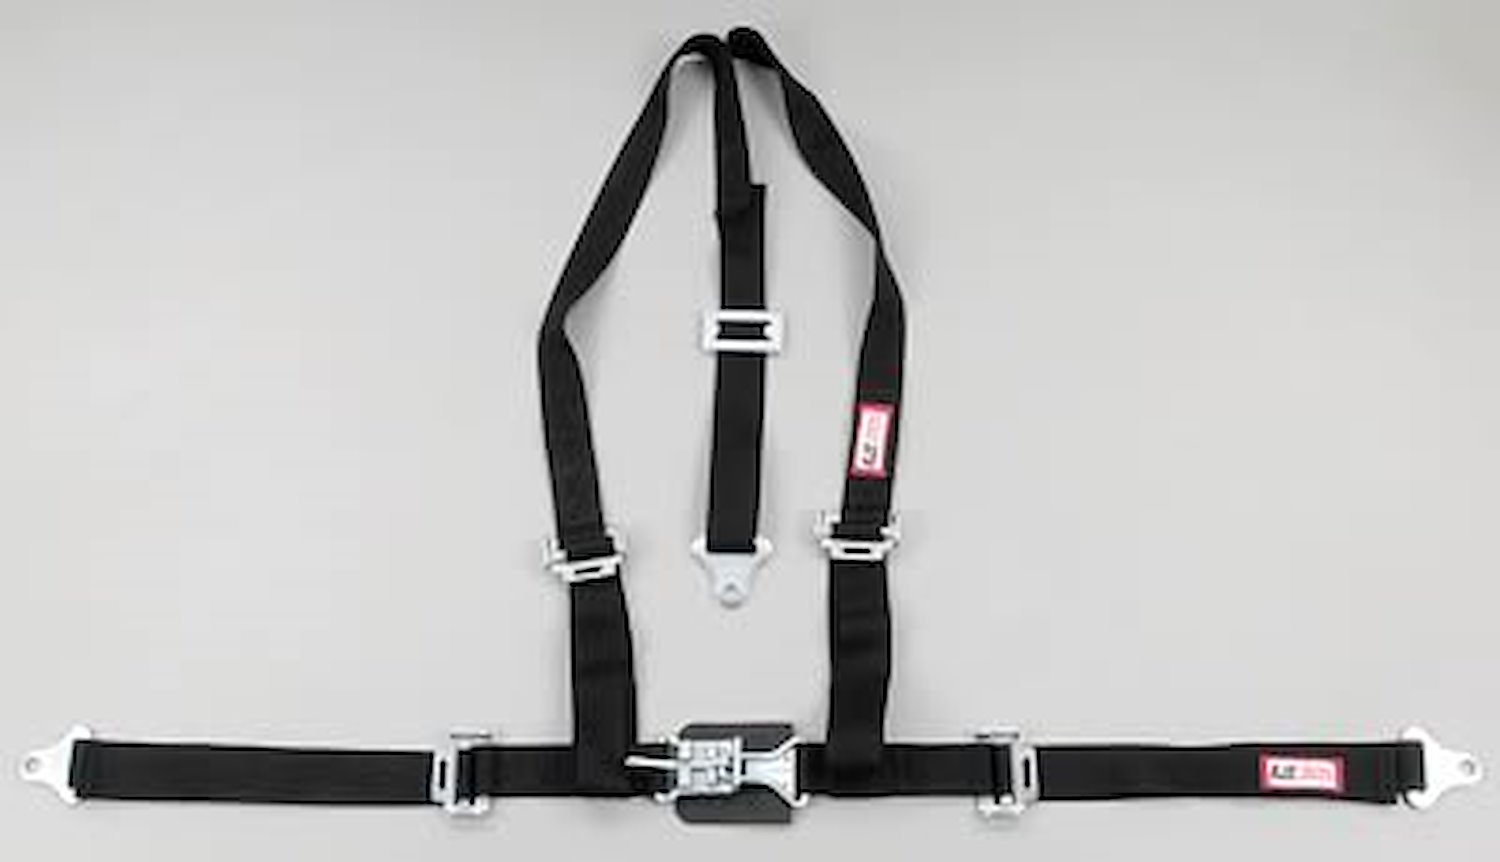 NON-SFI L&L HARNESS 3 PULL DOWN Lap Belt w/adjuster 2 S.H. Individual FLOOR Mount w/STERNUM STRAP ALL WRAP ENDS GRAY